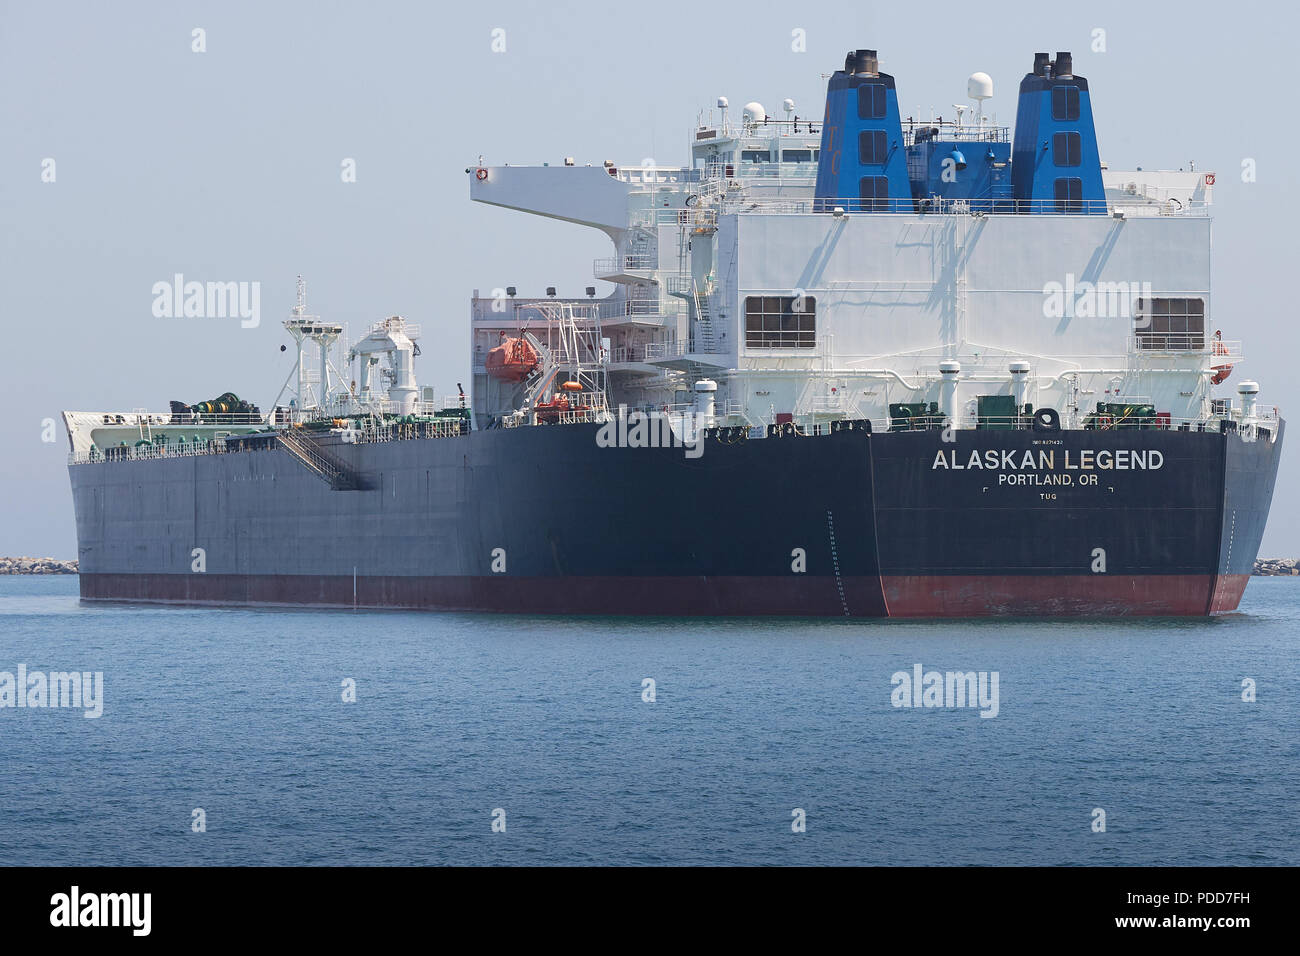 Stern View Of The Giant Supertanker (Crude Oil Tanker), ALASKAN LEGEND, At Anchor In The Port Of Long Beach, California, USA. Stock Photo